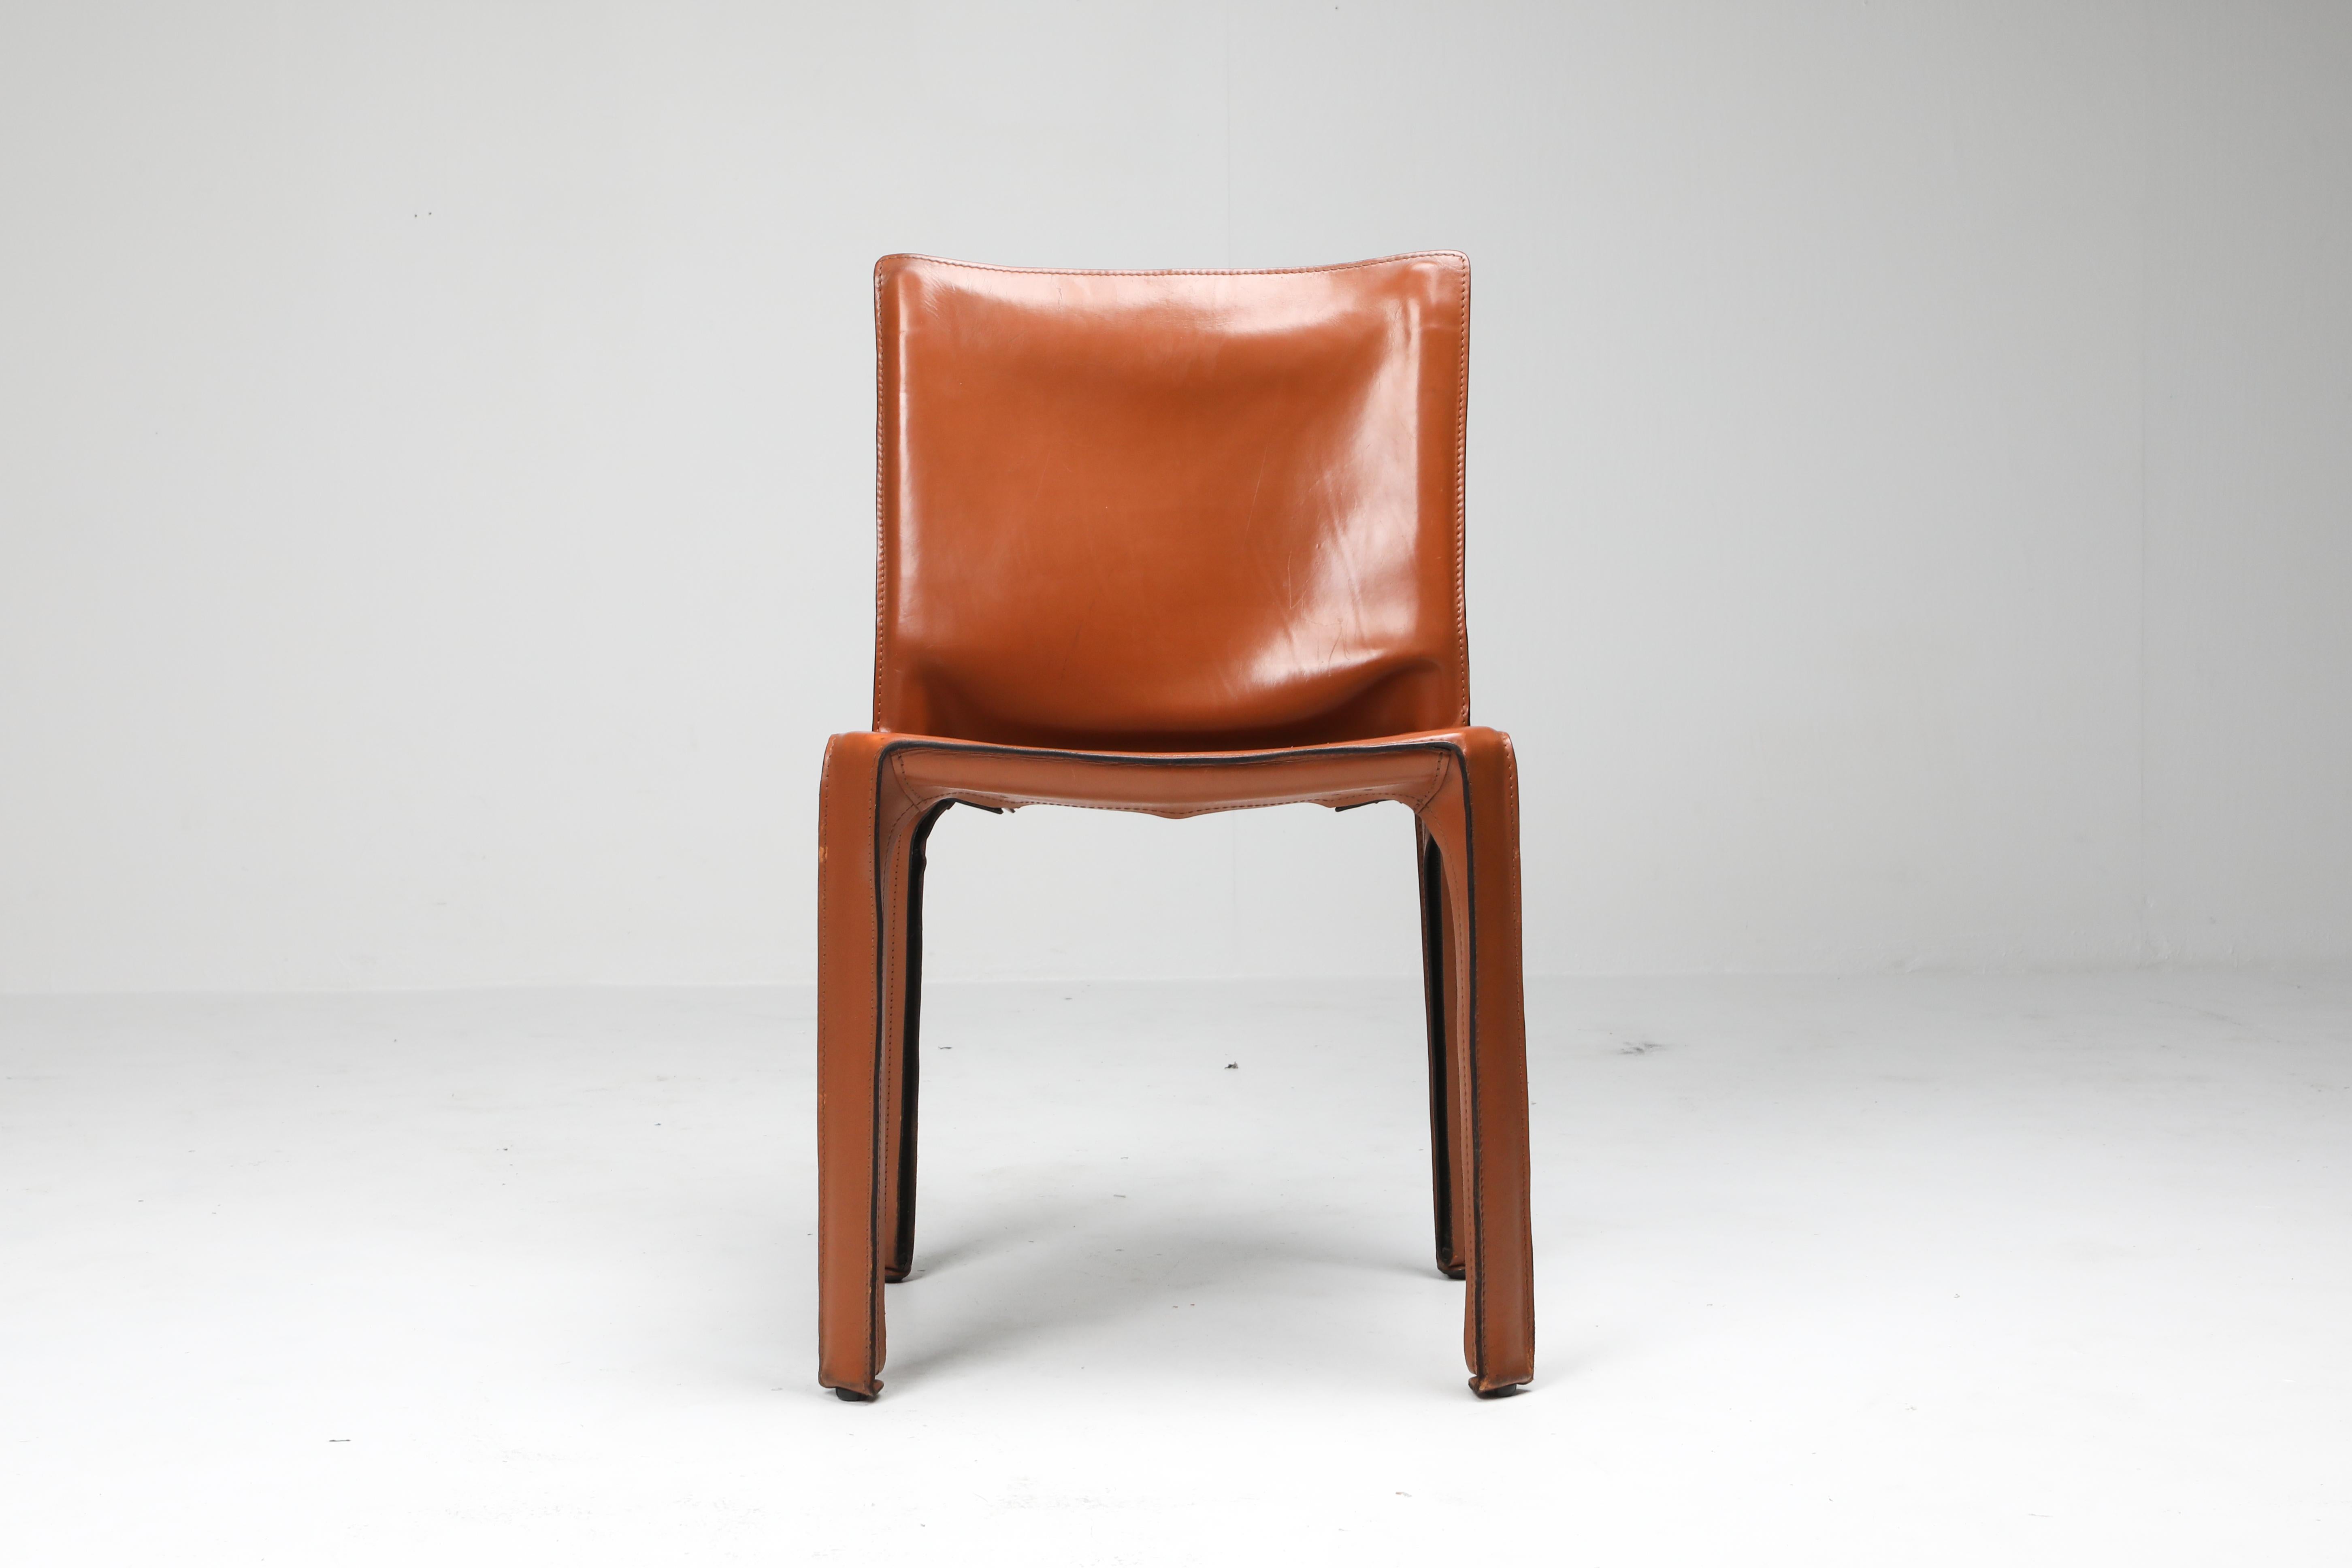 Post-Modern Mario Bellini's CAB Chair in Cognac Leather, Cassina, 1970s